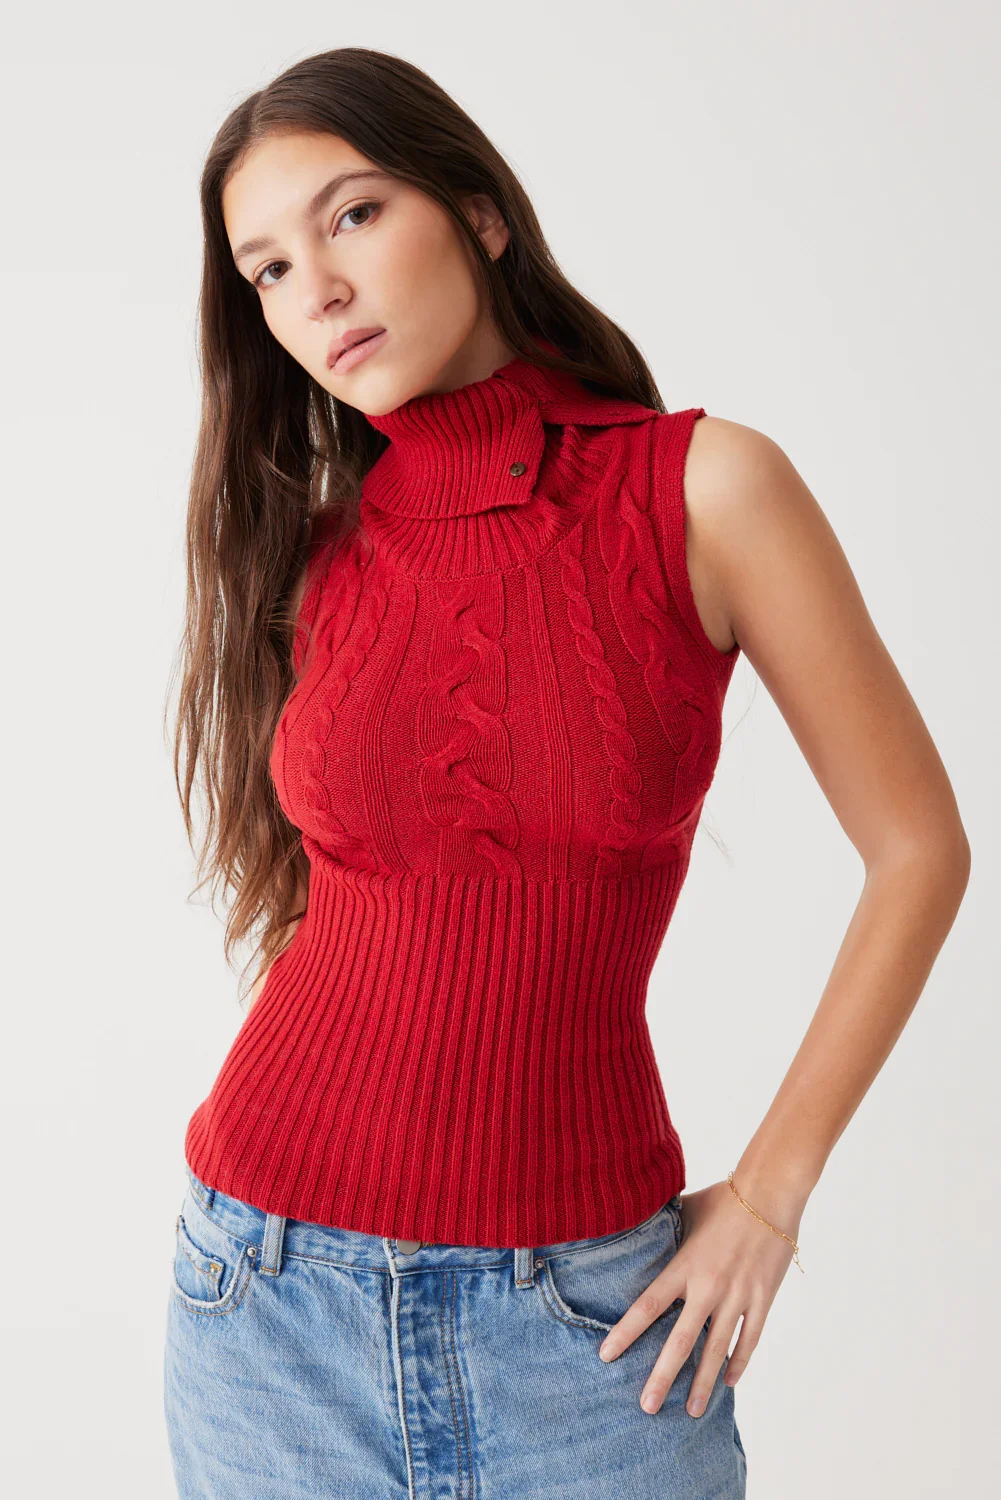 Image of Axel Cable Cloud Knit Sleeveless Sweater - Red Velvet